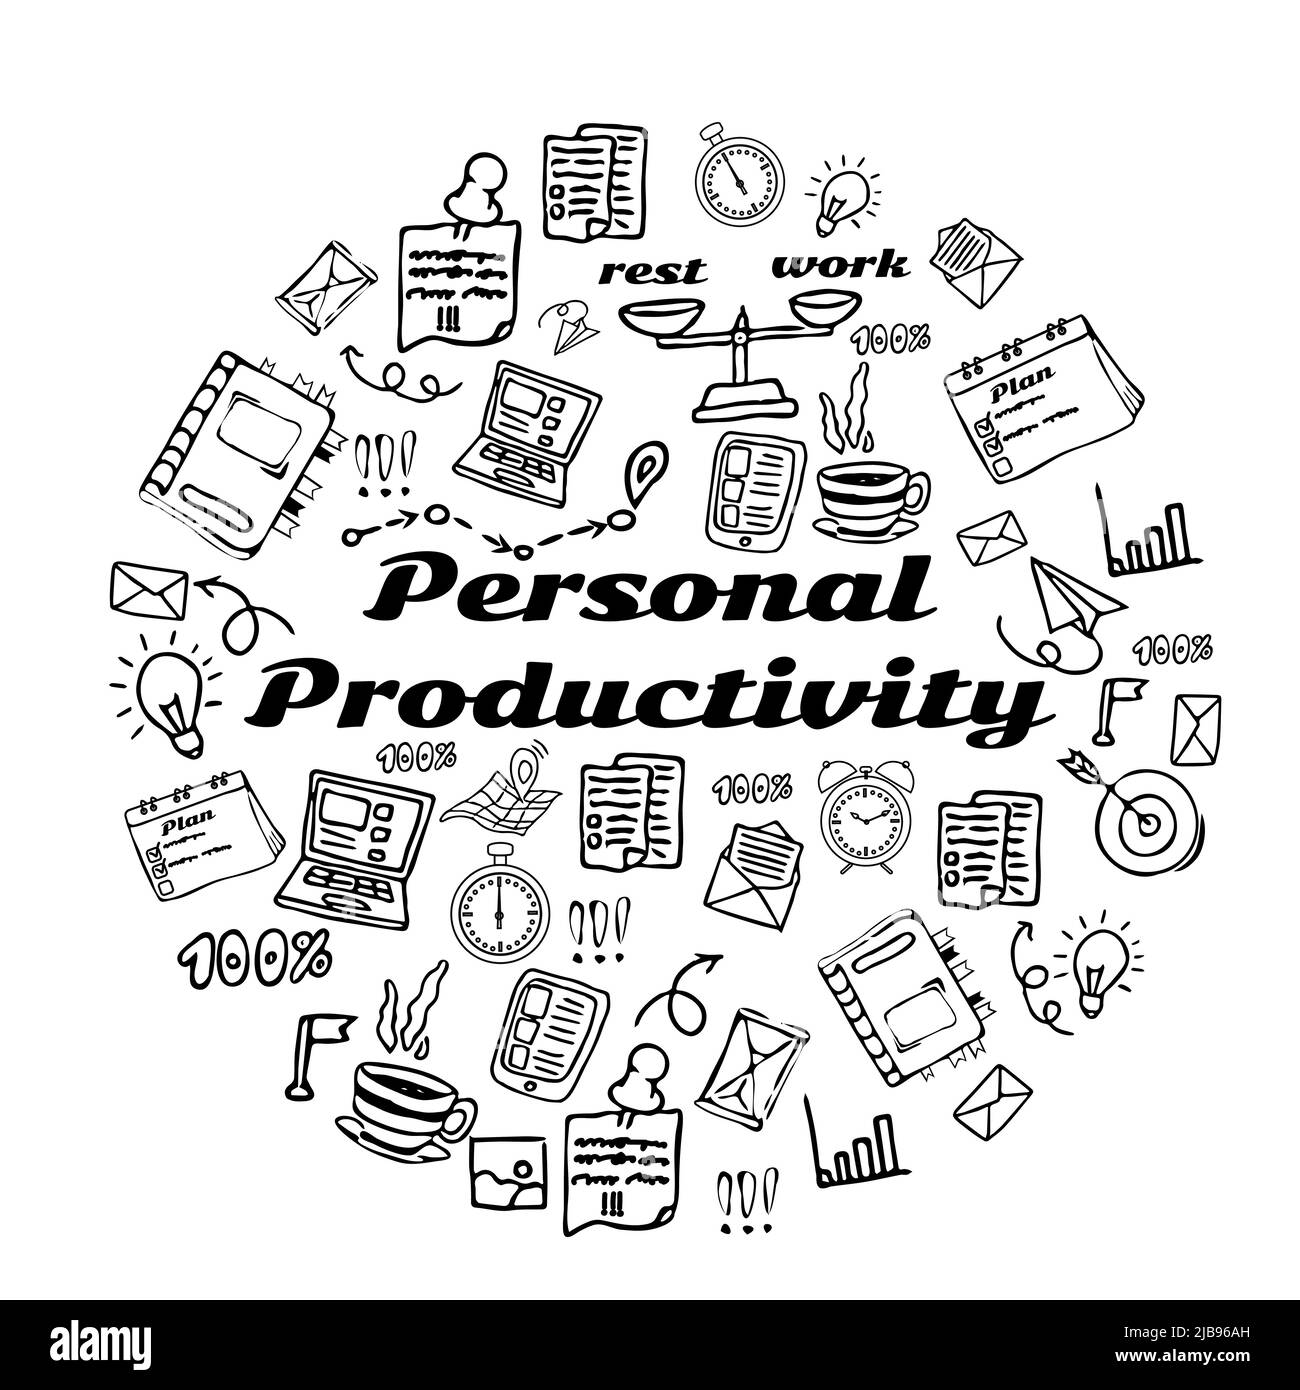 Doodle hand drawn elements of personal productivity, contour objects and text in round shape isolated on white background stock vector illustration. Time management, goals and growth. Stock Vector